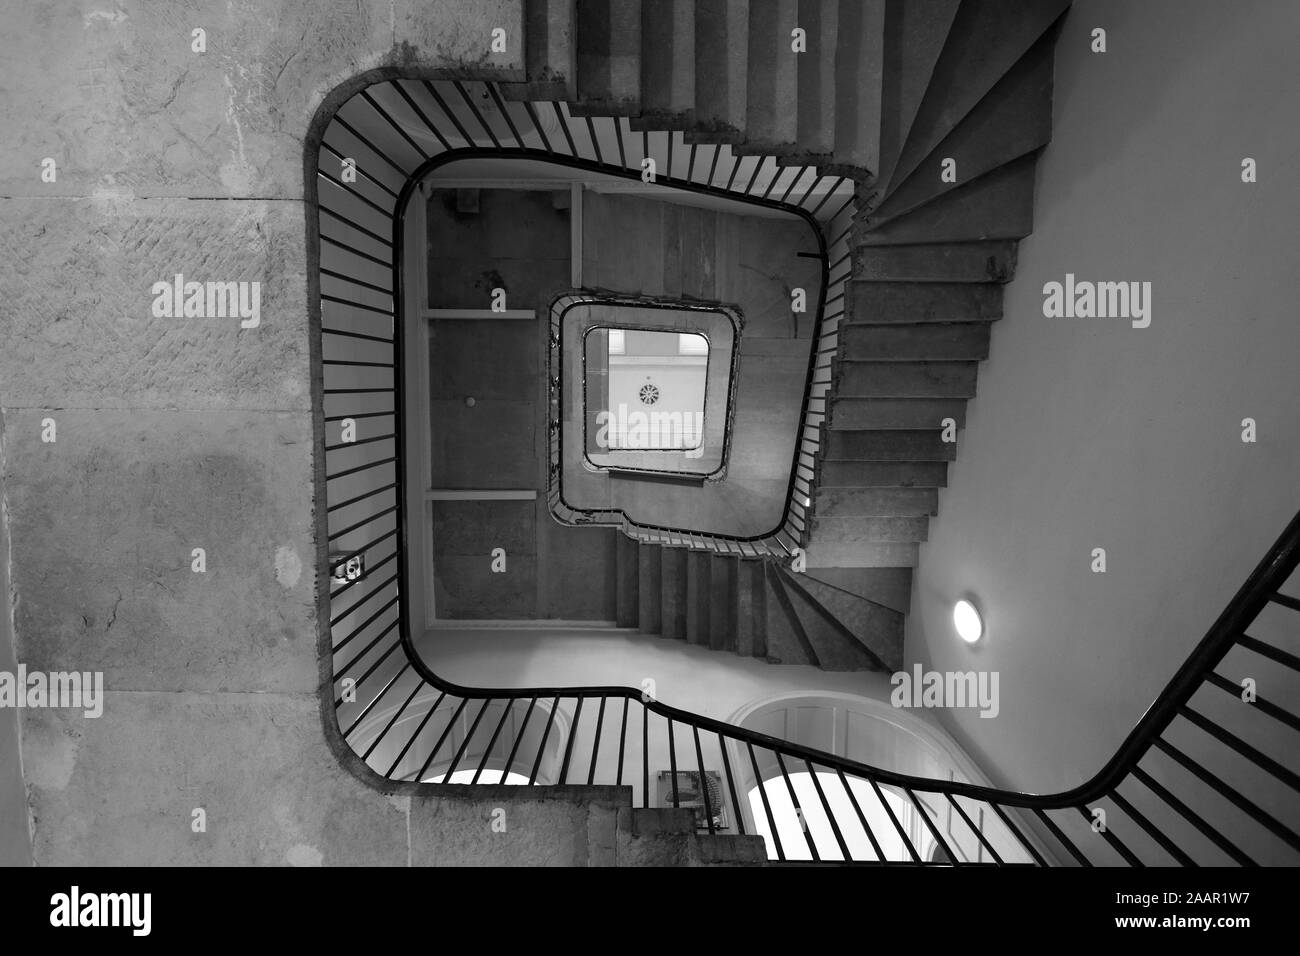 L'escalier, Somerset House, The Strand, London City, Angleterre Banque D'Images